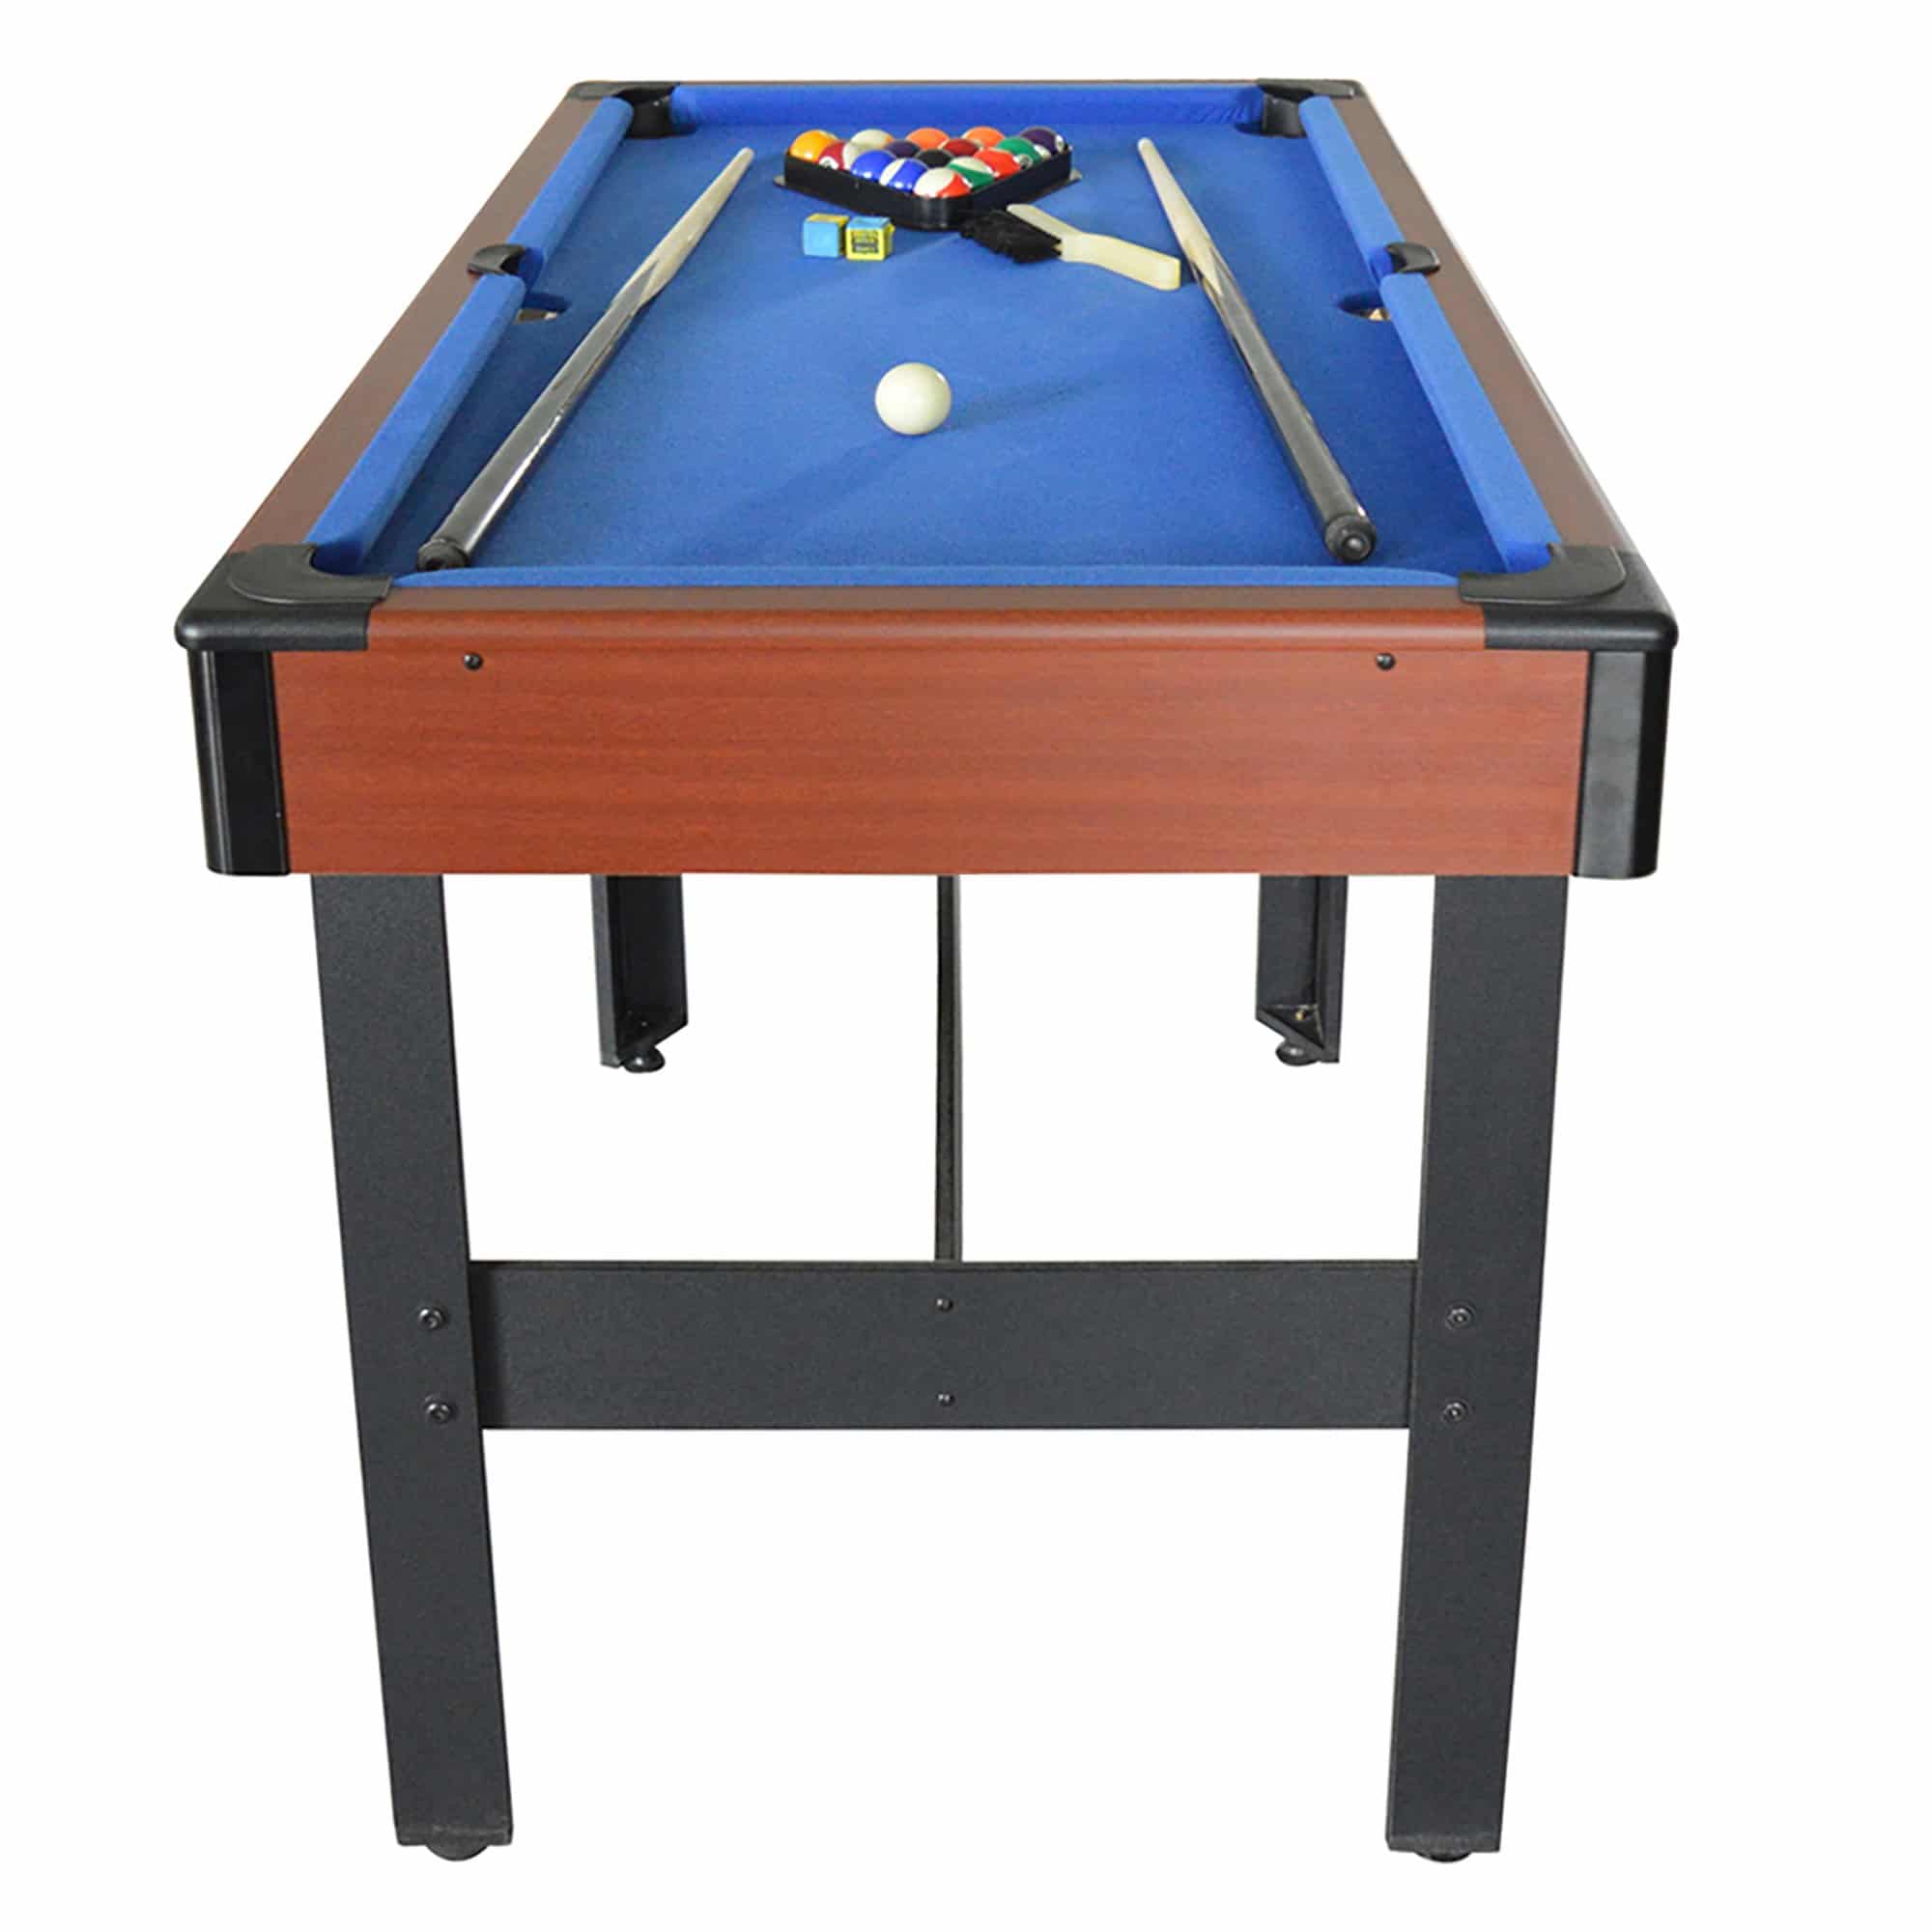 Triad 48 In 3-in-1 Multi-Game Table - Pool Warehouse